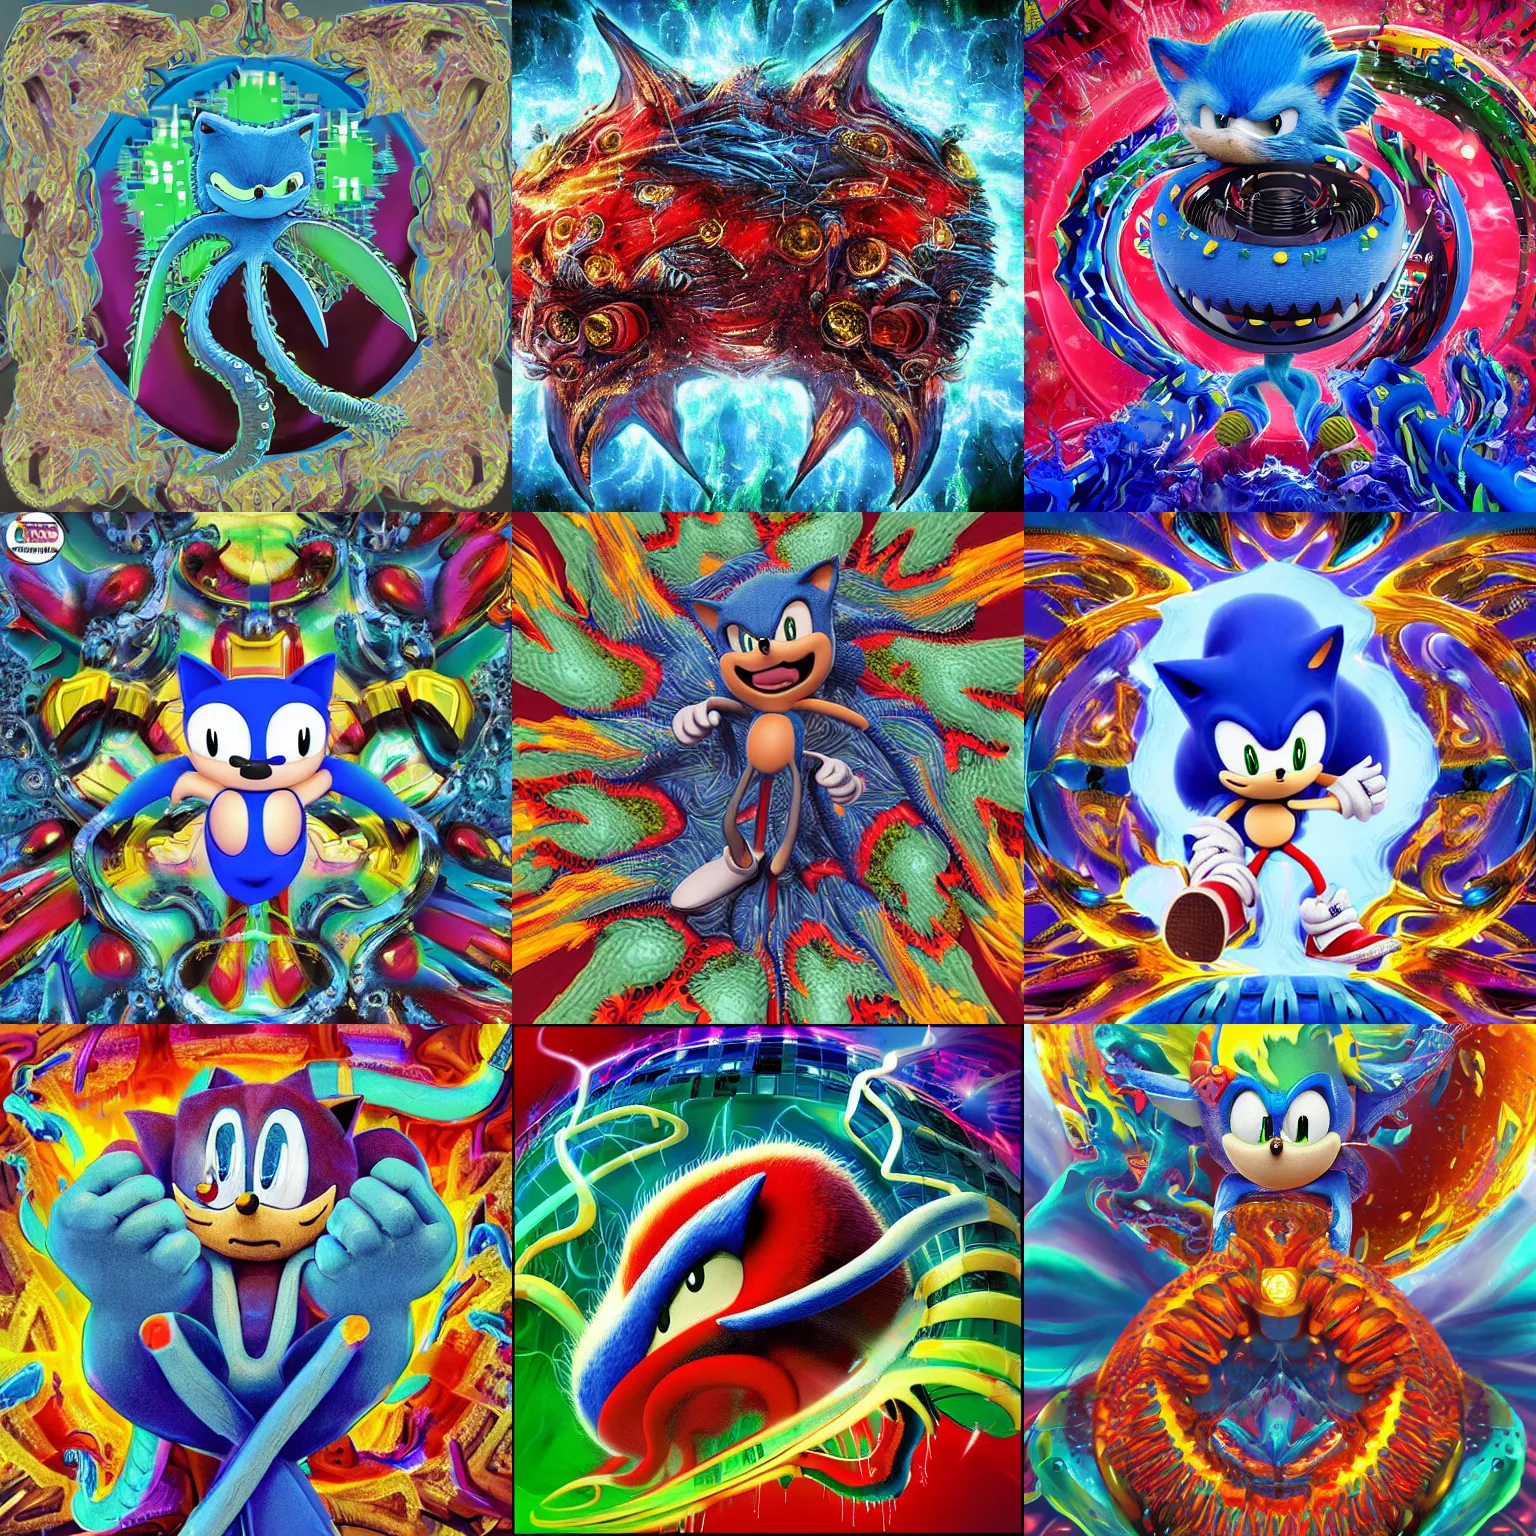 Prompt: sonic hedgehog portrait in the shape of a surreal hopalong fractal, detailed professional, high quality portrait sonic airbrush art MGMT album cover portrait of a liquid dissolving iconic and shocking tentacled truth. Flamboyant city galletry urban disco sonnissensensation flamboyant tripping bird style 3D and surreal cartooney nuclear blast maniacal smokescreen psychedelic shpongle art pop raz Promorade Grande outsideat Parties Tailoralogic Combo grill 003 shindig shivery fun citystyle lamborghini commando levils jewskateparty bike ship headed west out the bay, sonic the hedgehog. Exquisite strange & magical made chatterceptually visual nautcentric hopalong urban surreal 3D visionaries aromatetic together juicy arty monkey picture making animation